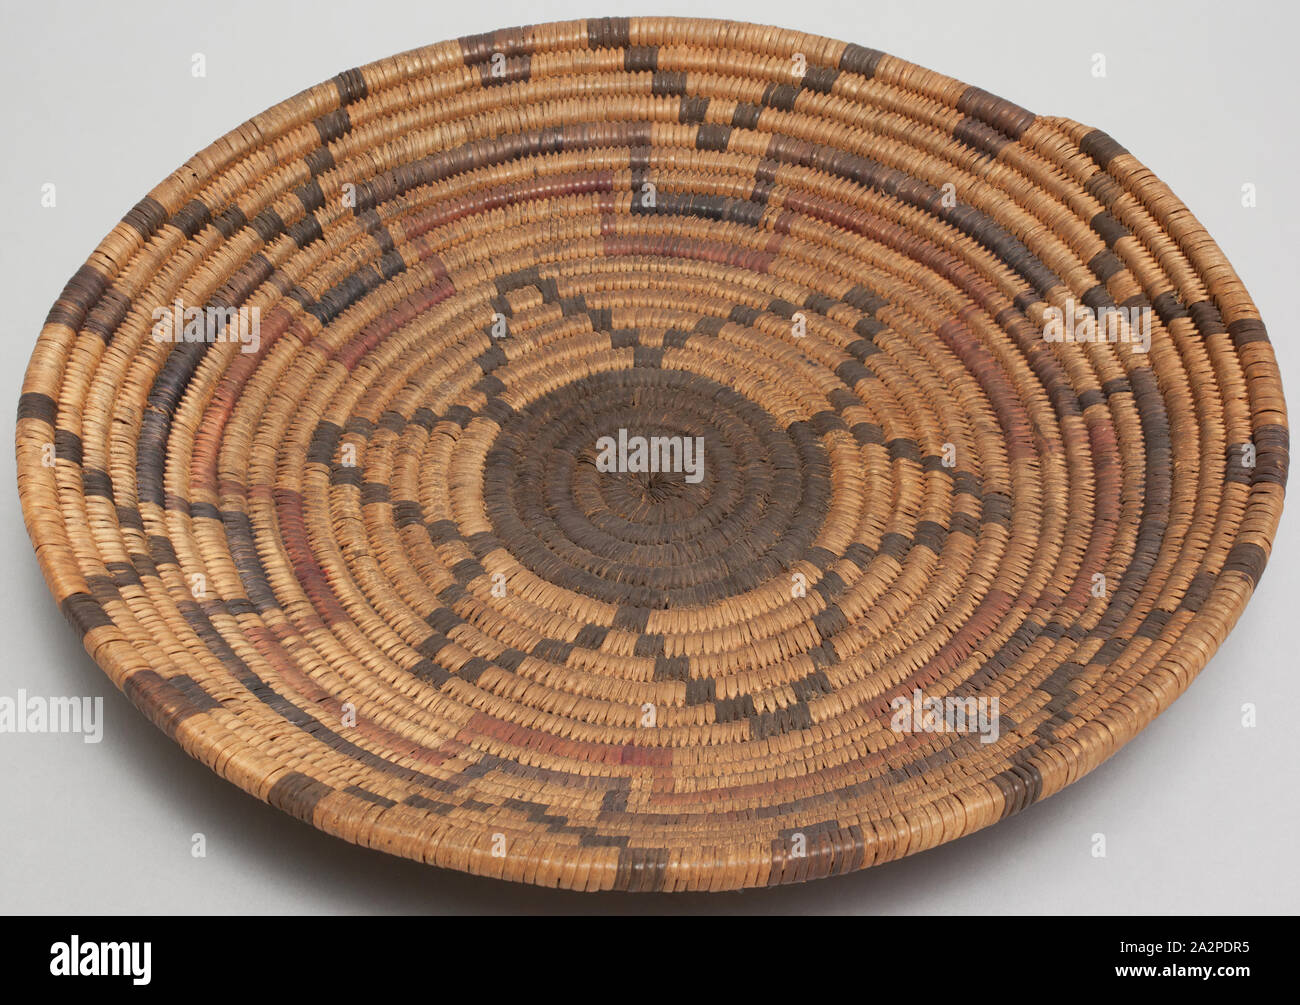 Apache, Native American, Basket, 19th century, willow and devil's claw (martynia), Overall: 1 5/8 × 9 7/8 inches (4.1 × 25.1 cm Stock Photo